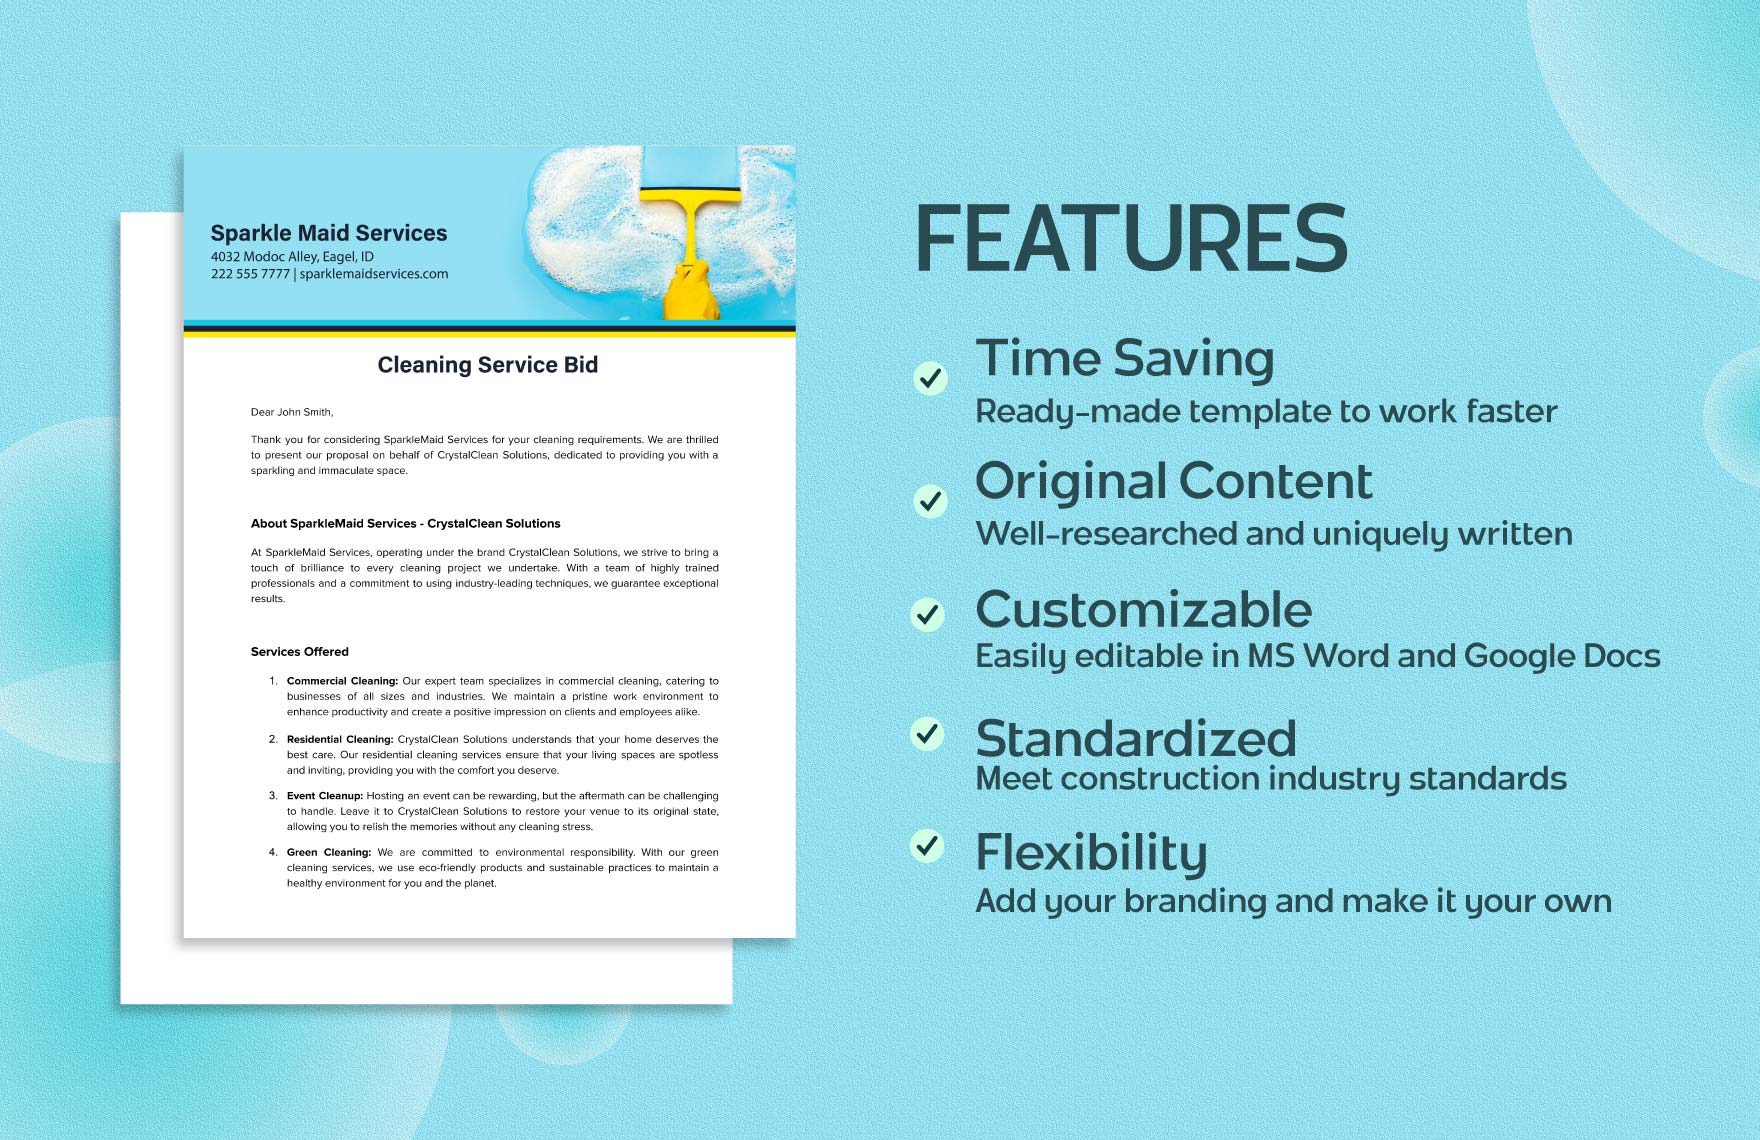 Cleaning Service Bid Template